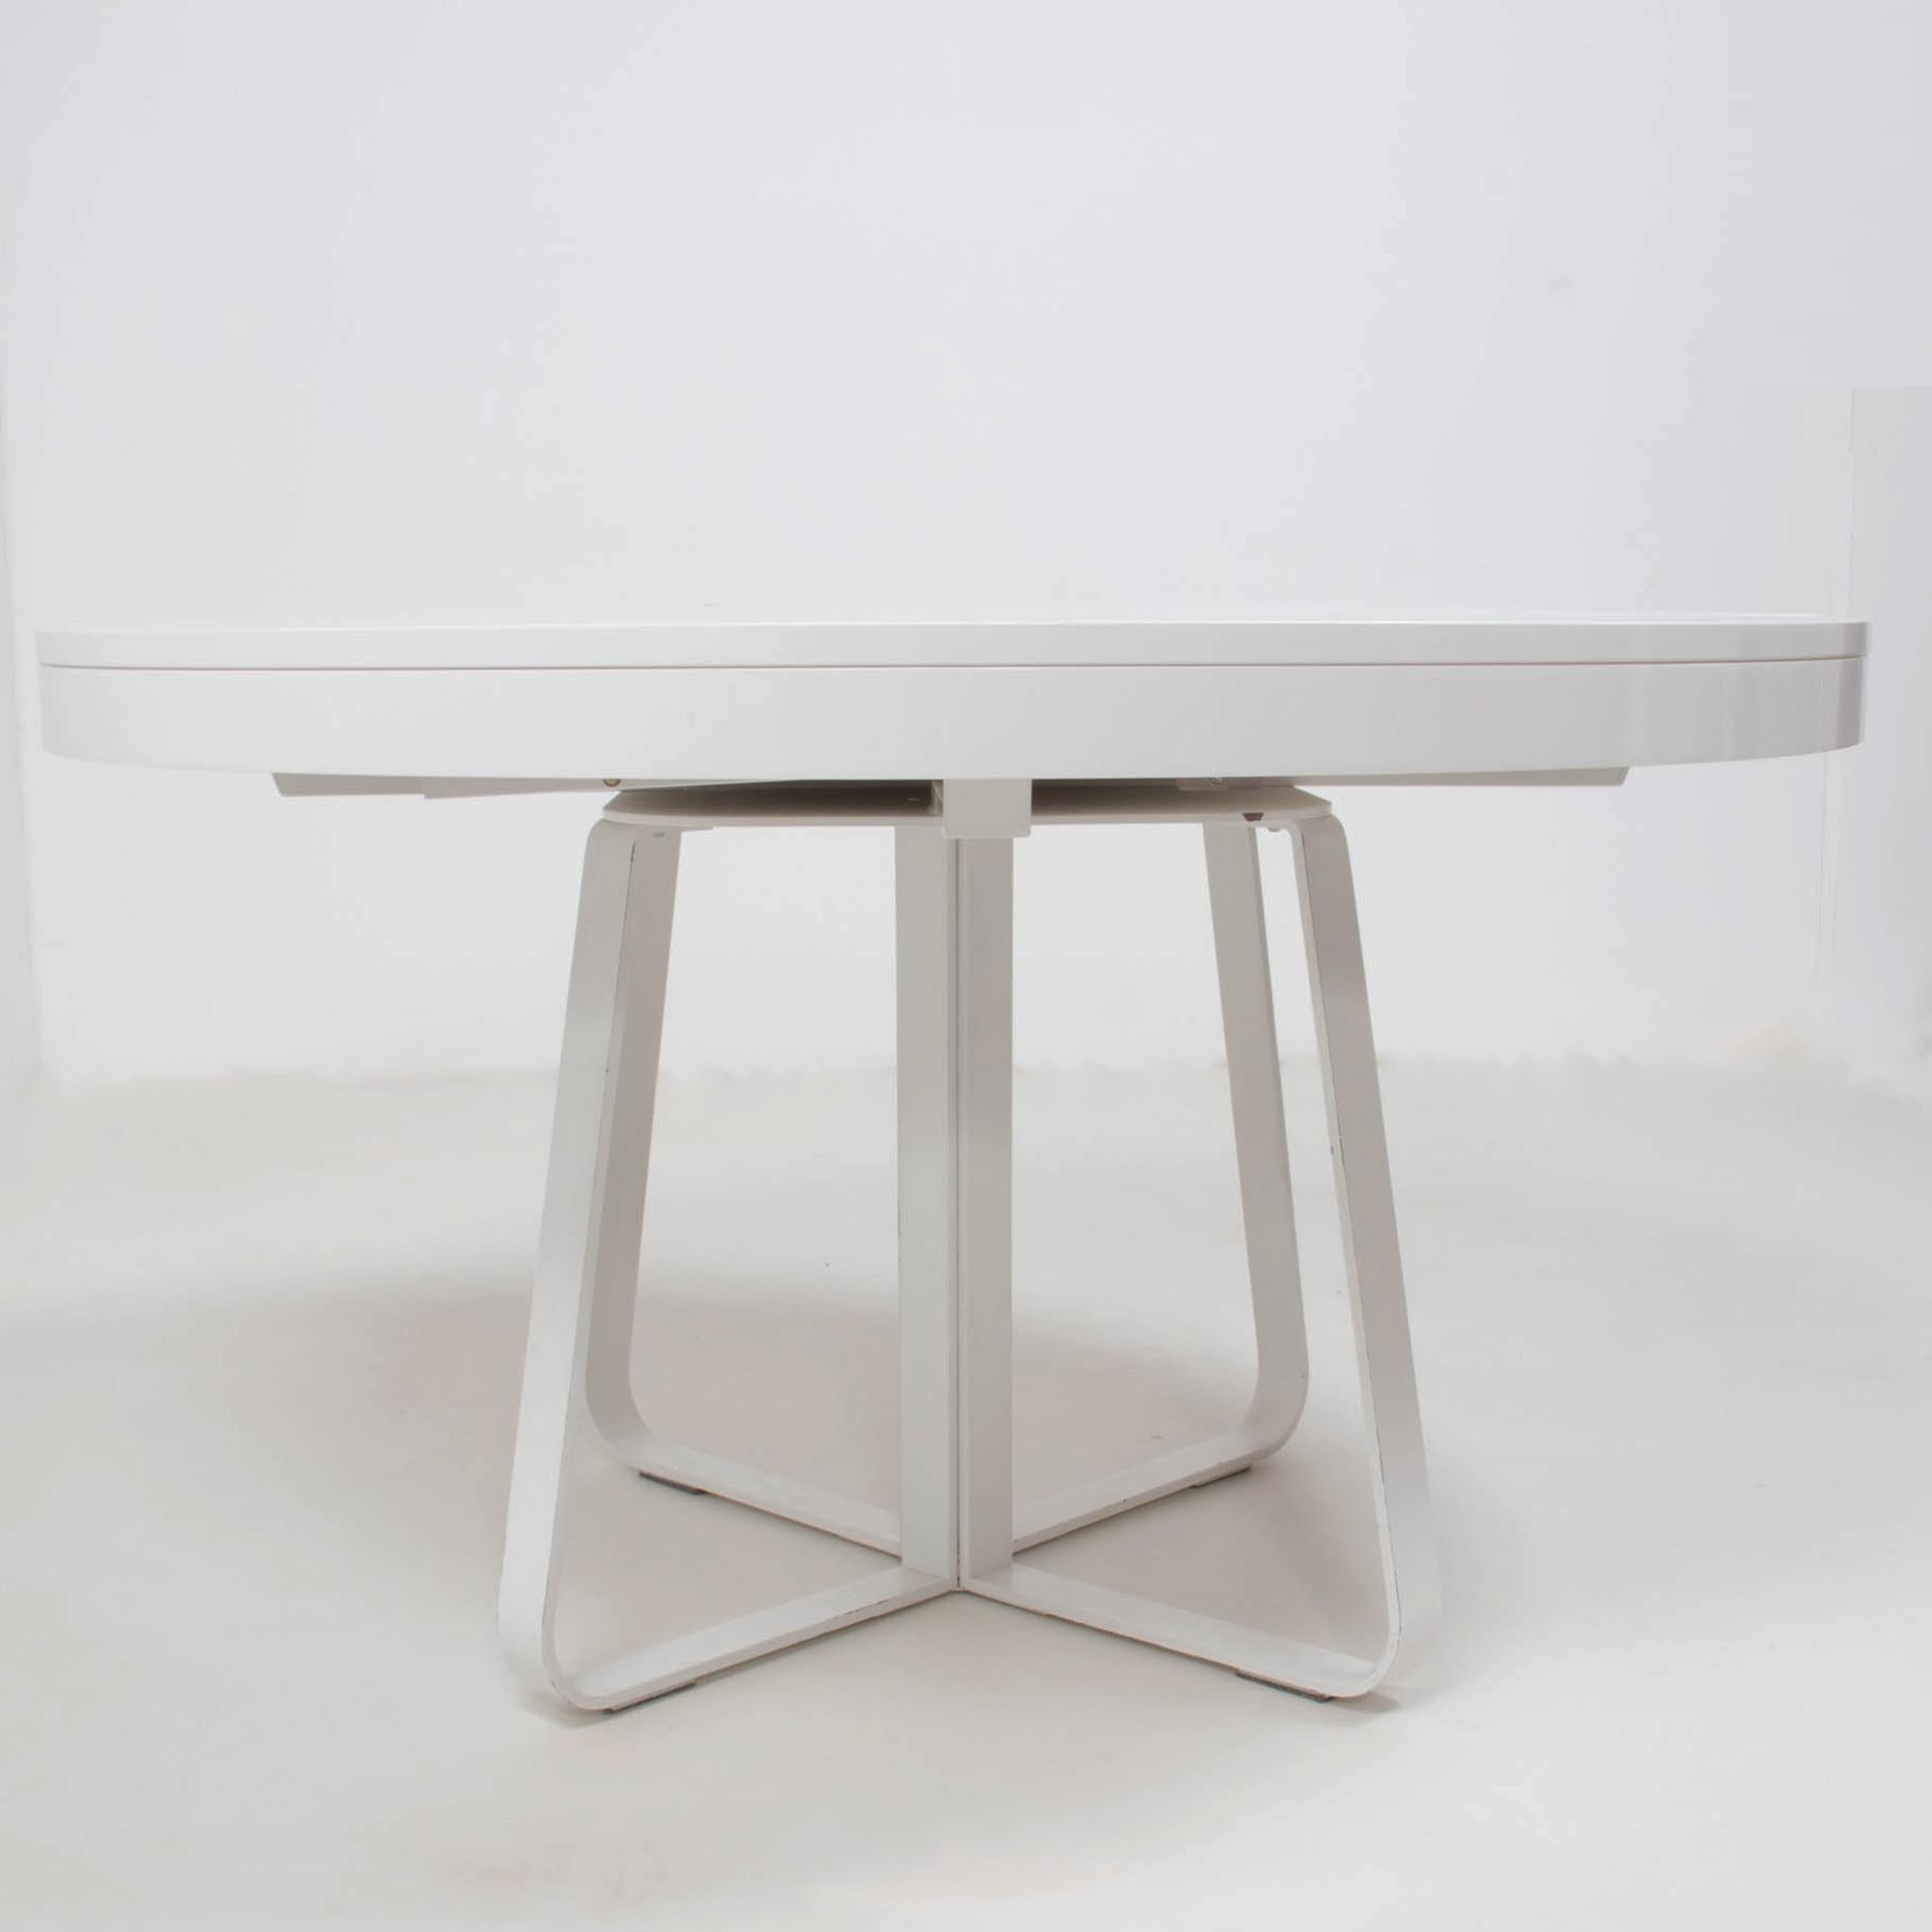 Designed by Thibault Desombre for Ligne Roset, the Ava dining table combines sleek style with modern practicality.

At the smaller size, the round dining table seats 4 people with a beautiful smooth, white lacquered finish. The central base is